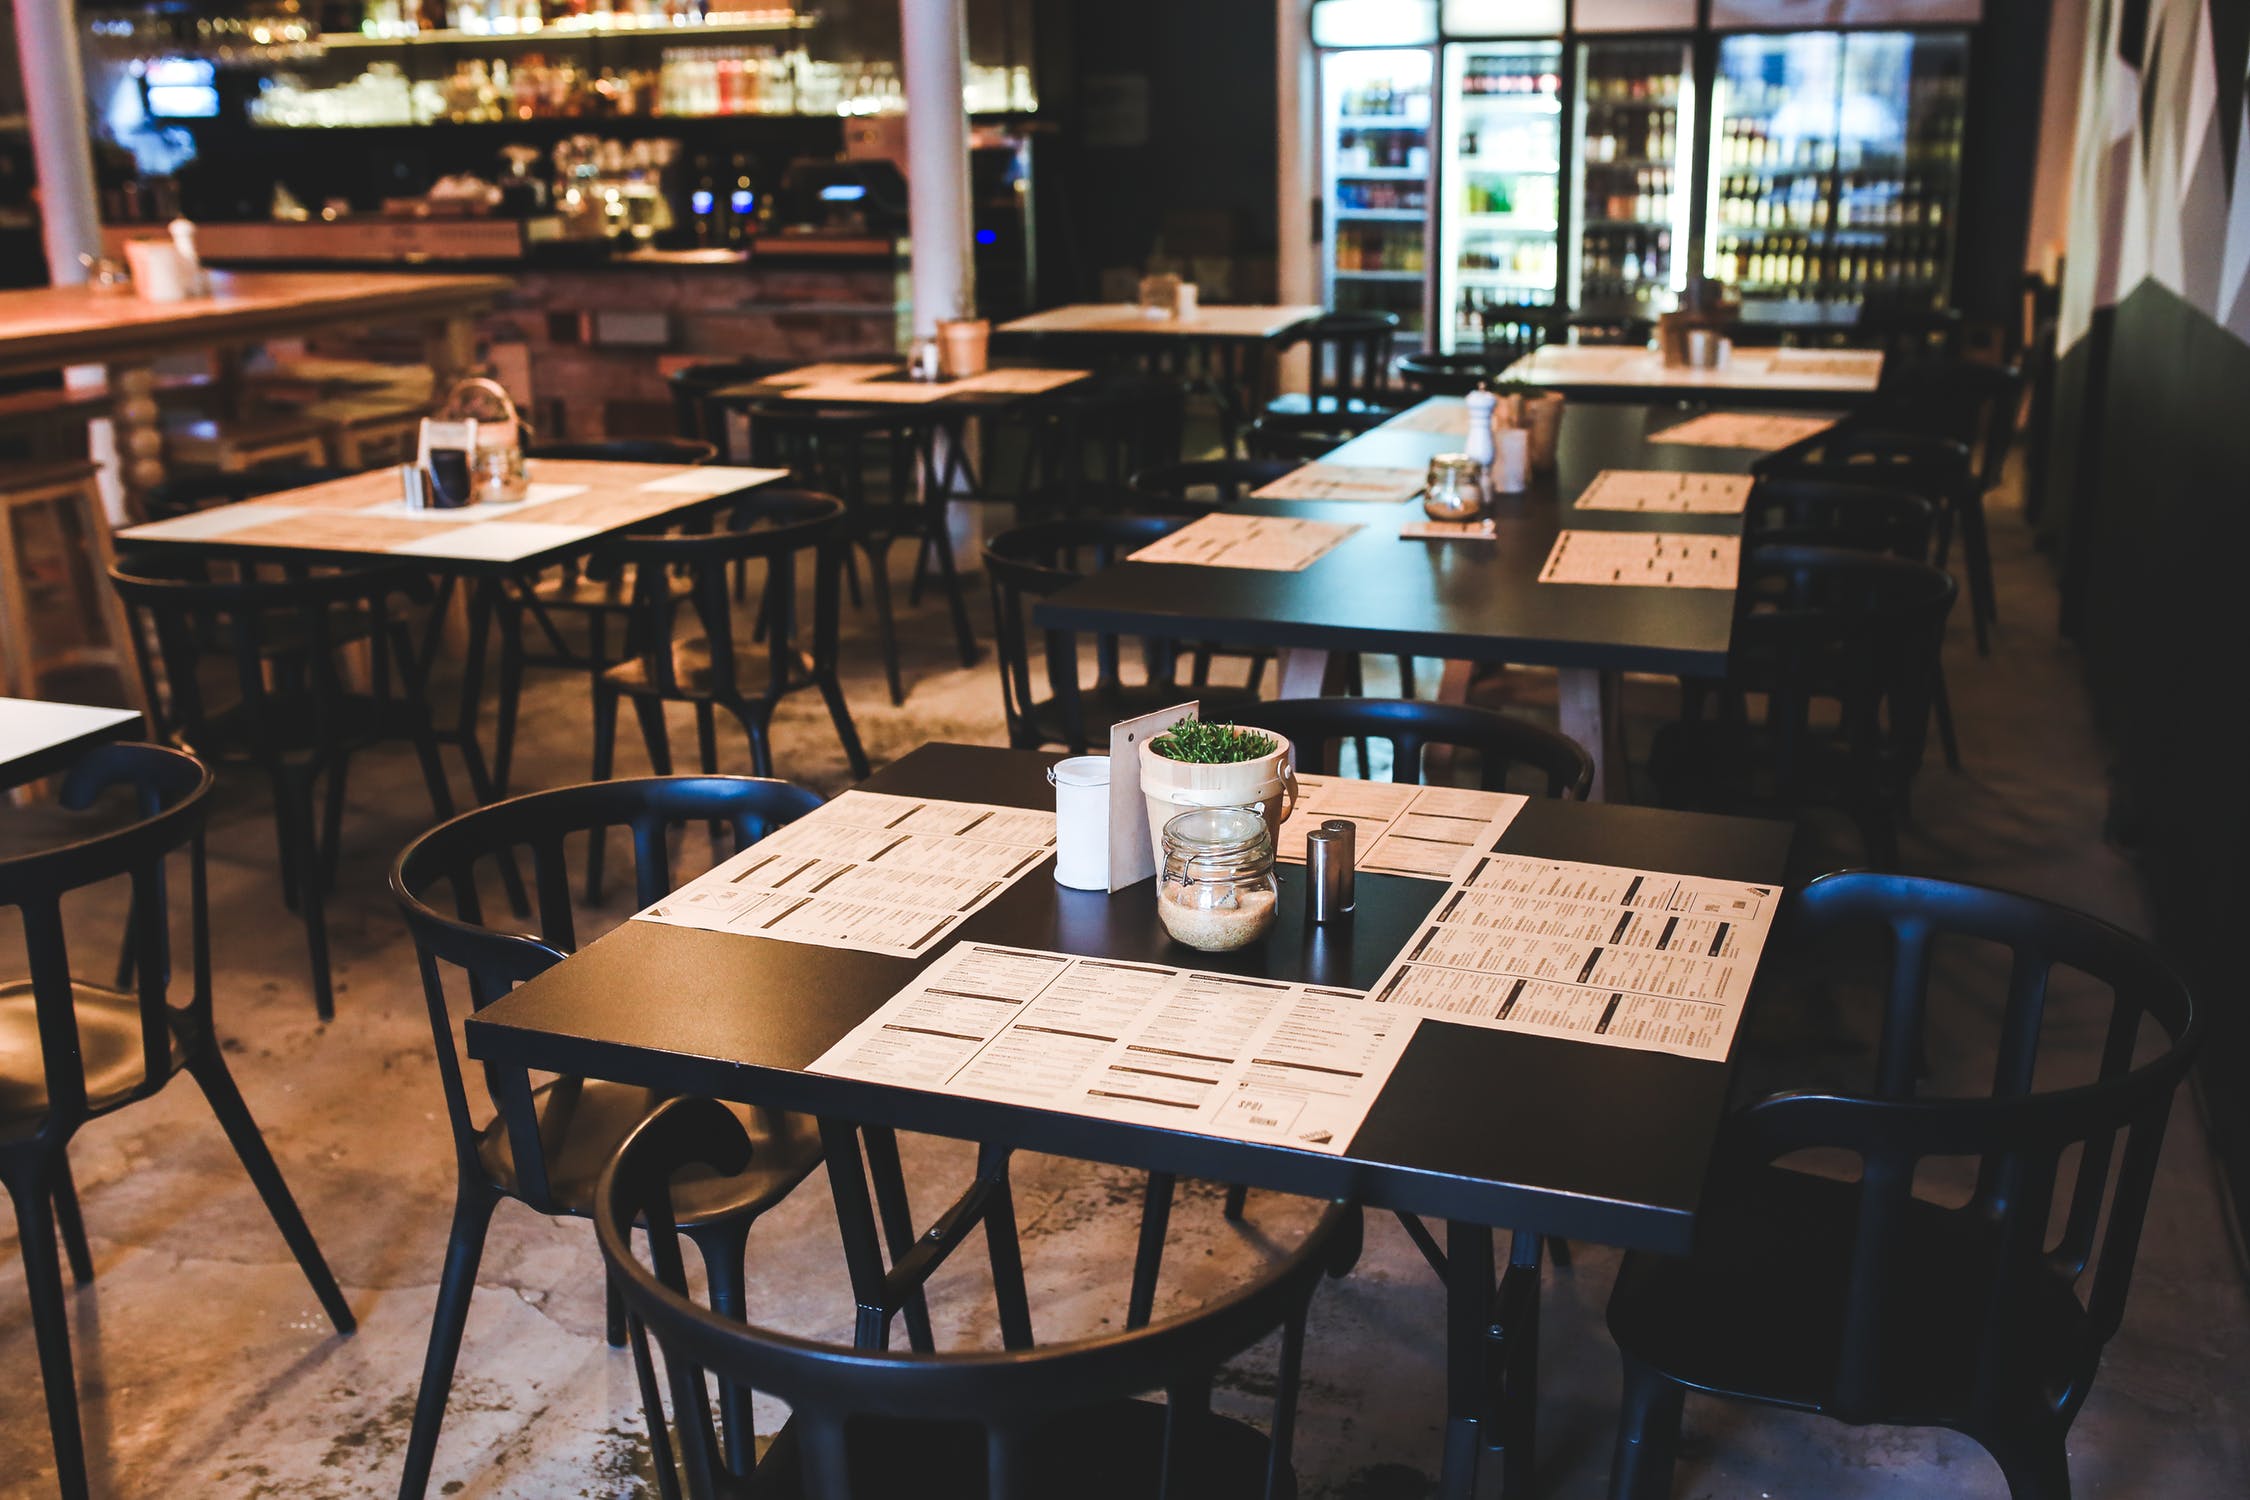 5 Easy Ways Your Restaurant Can Win New Customers